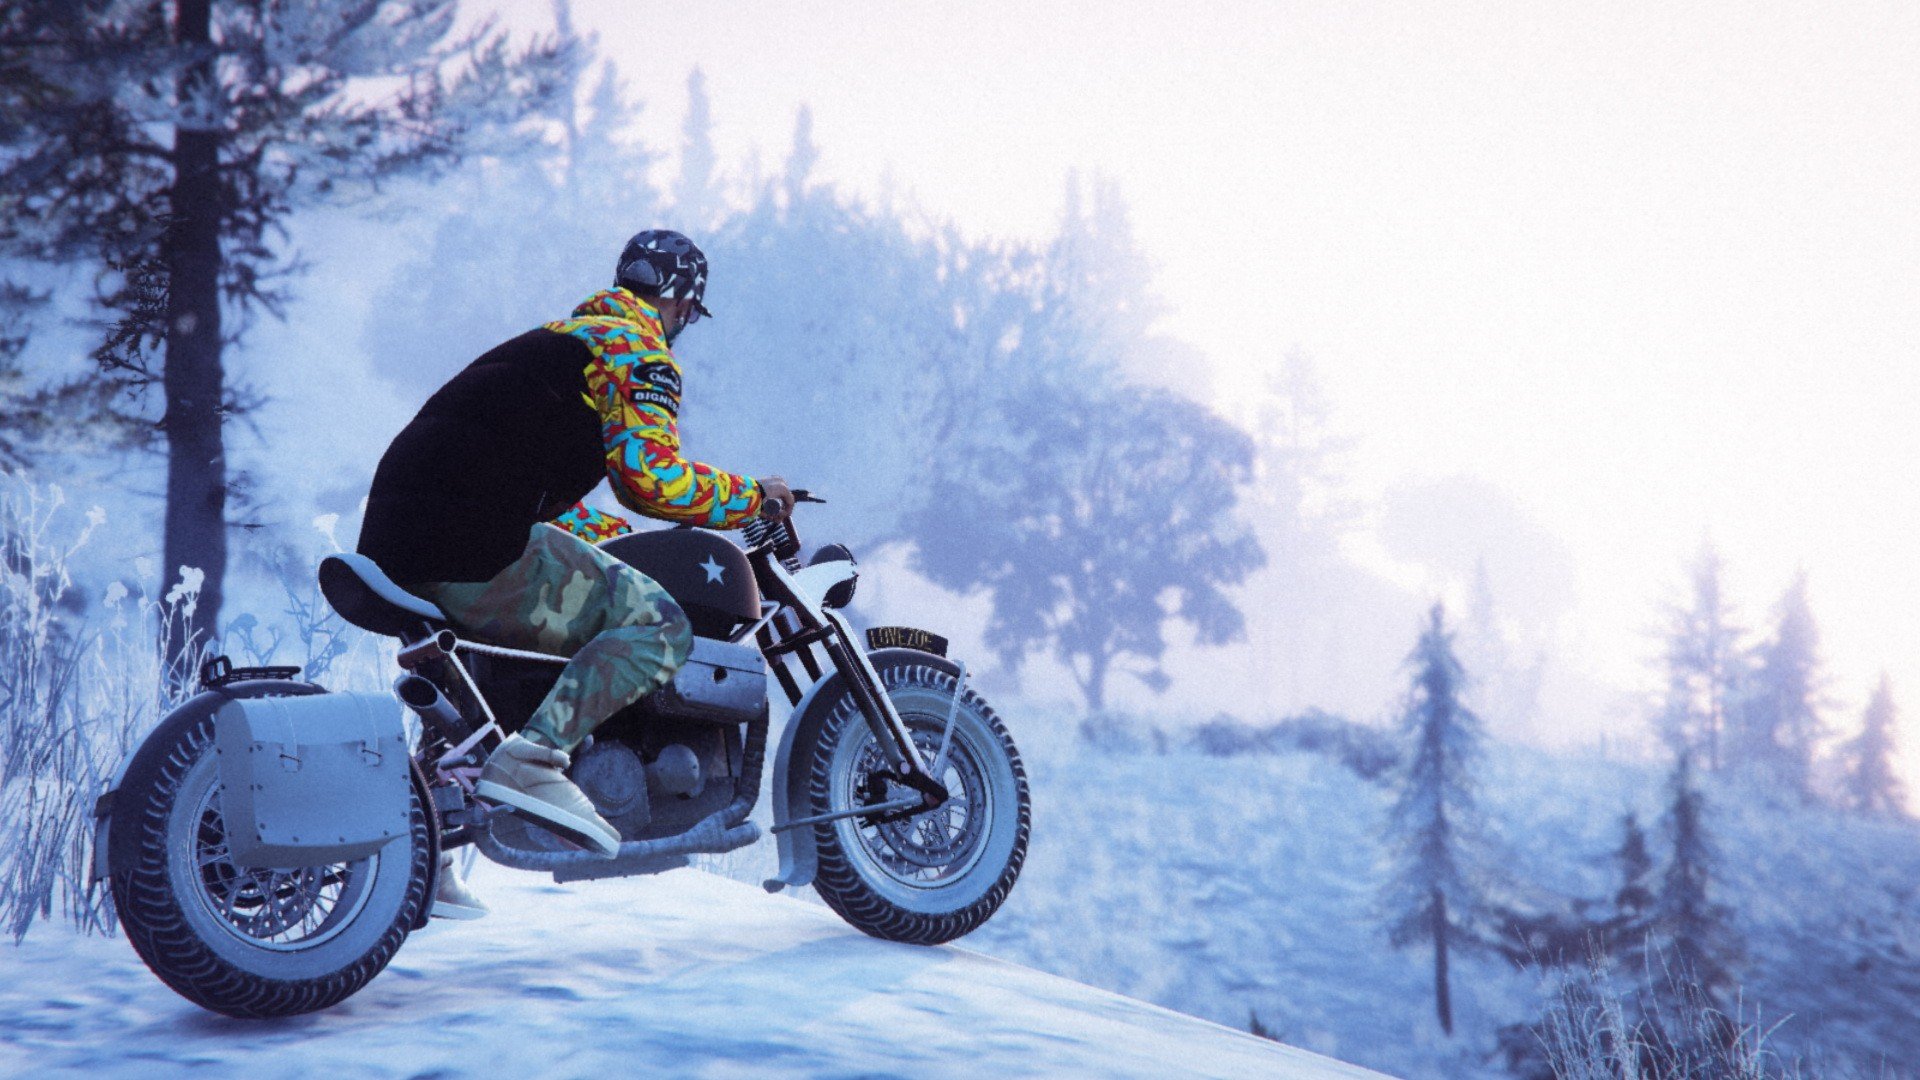 Grand Theft Auto V, Grand Theft Auto Online, Rockstar Games, Motorcycle